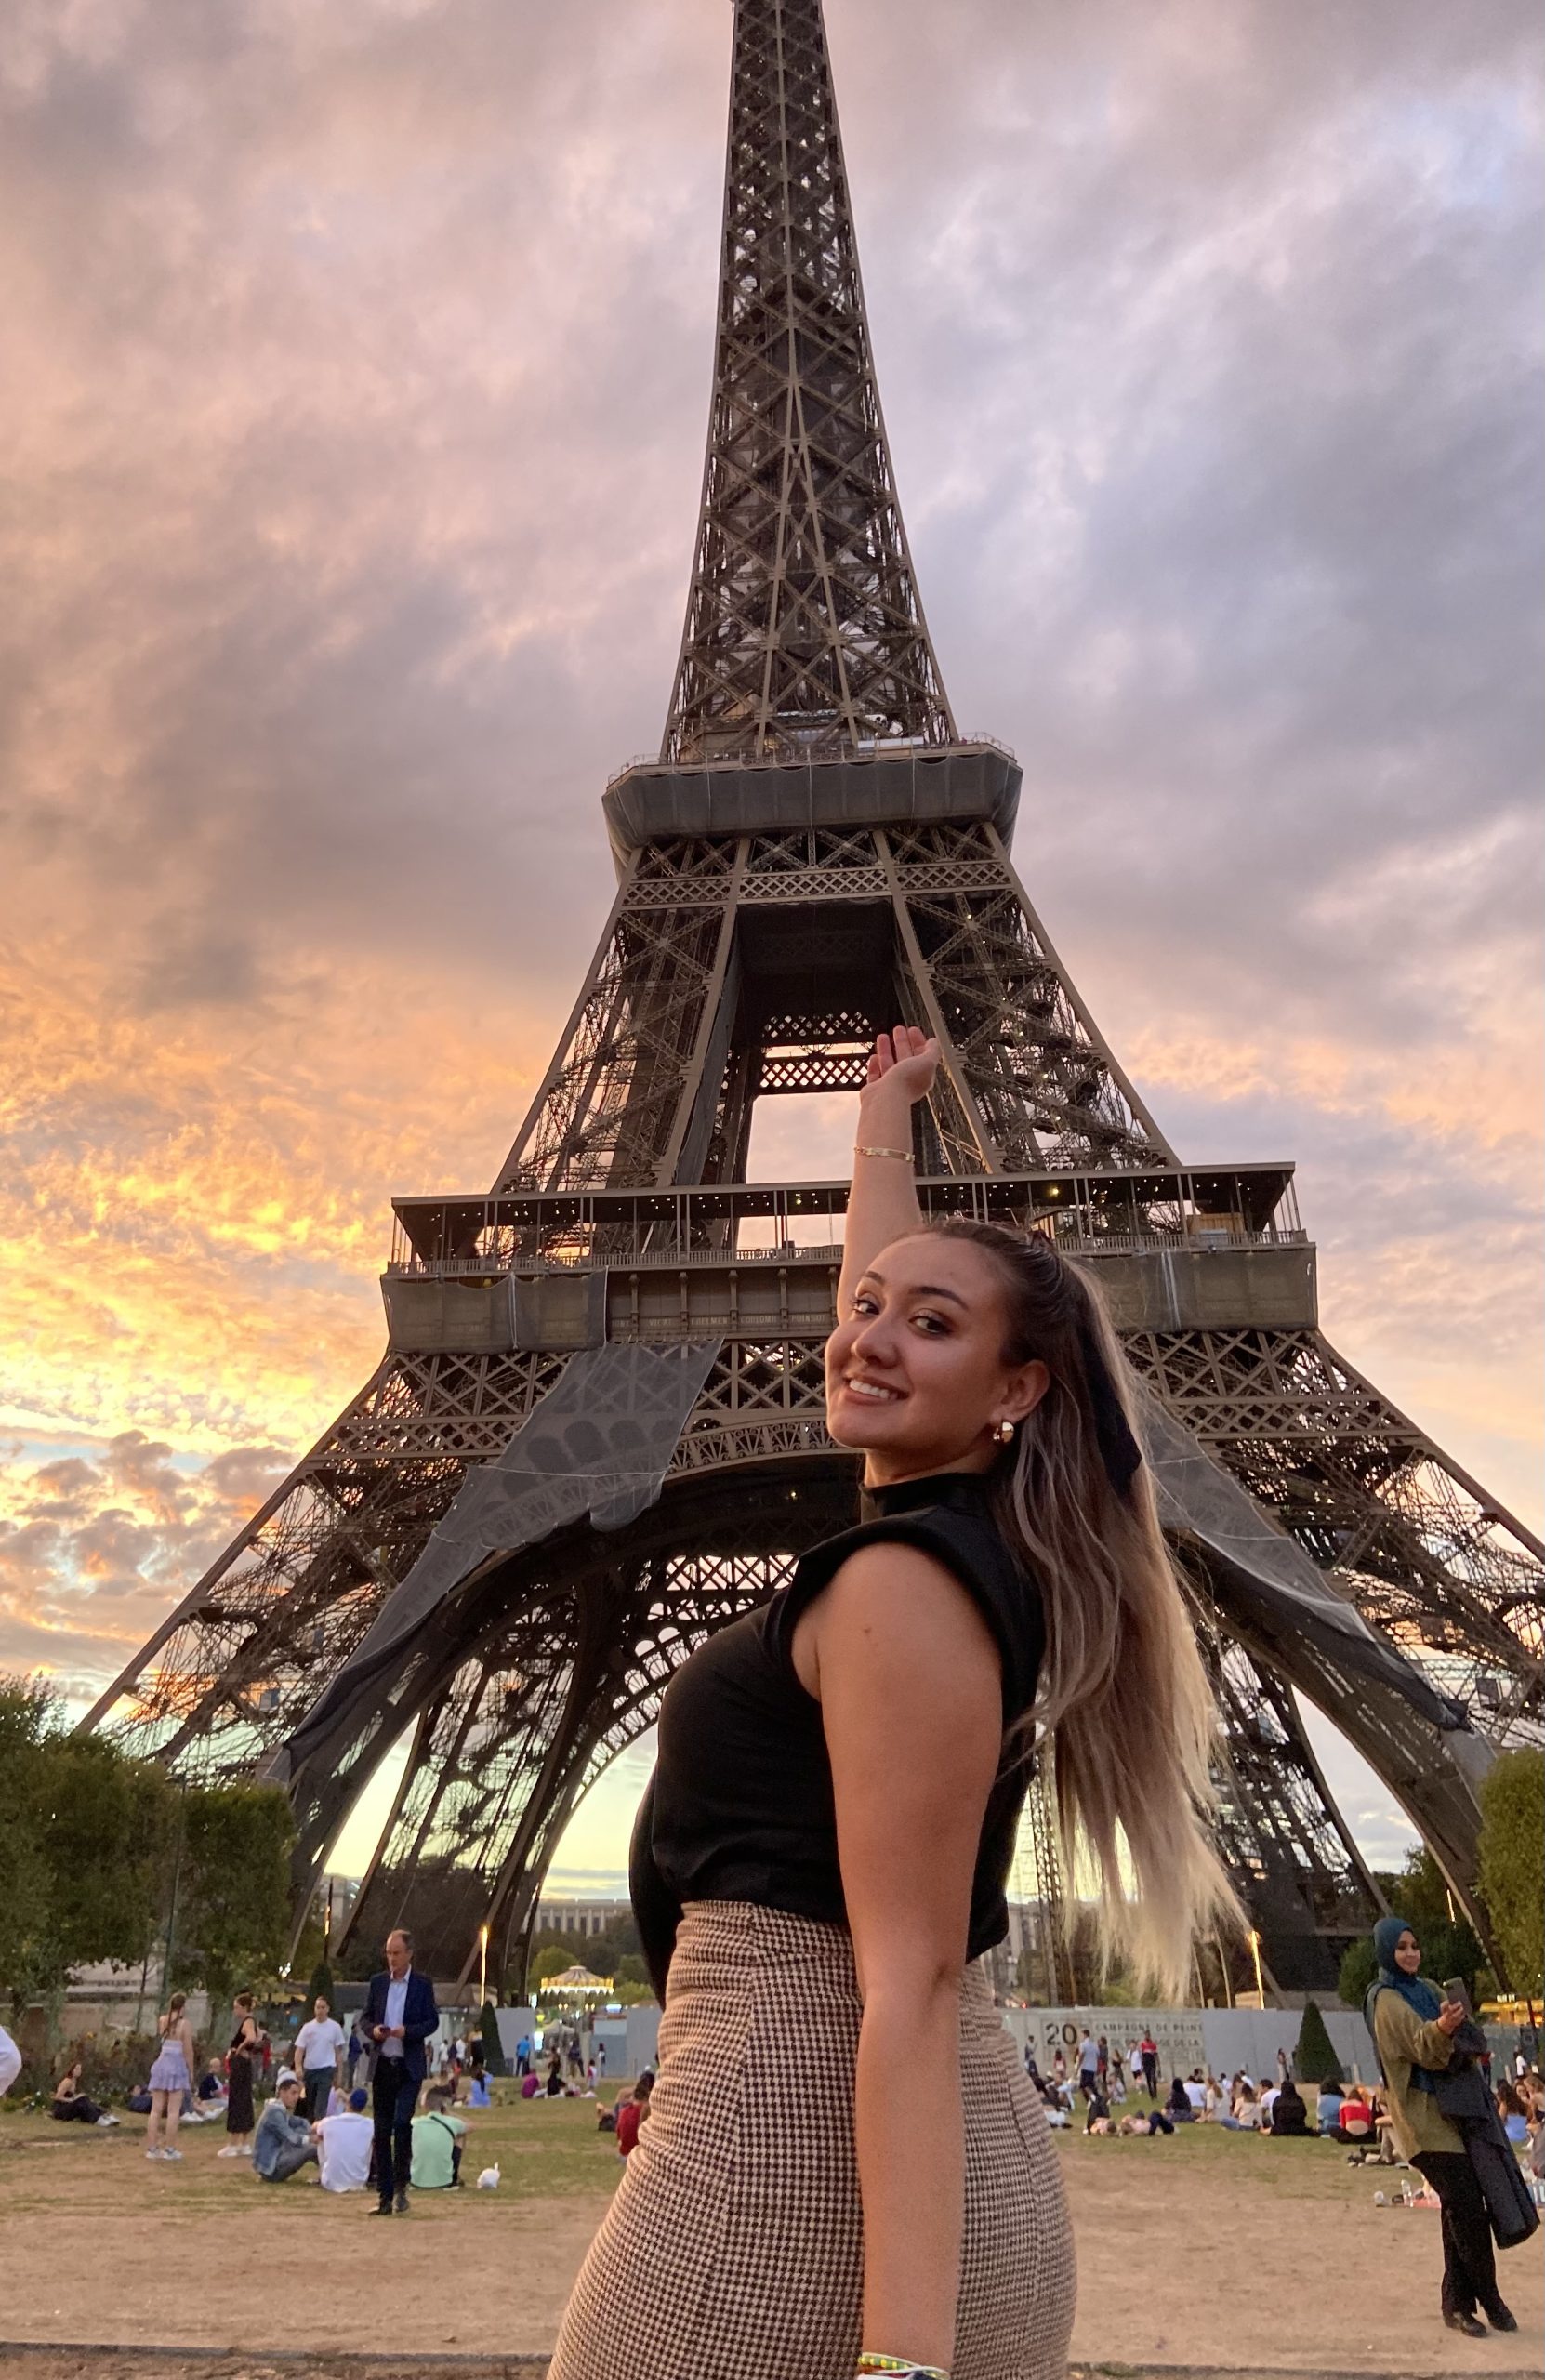 Jamie poses in front of the Eiffel Tower as the sun sets.